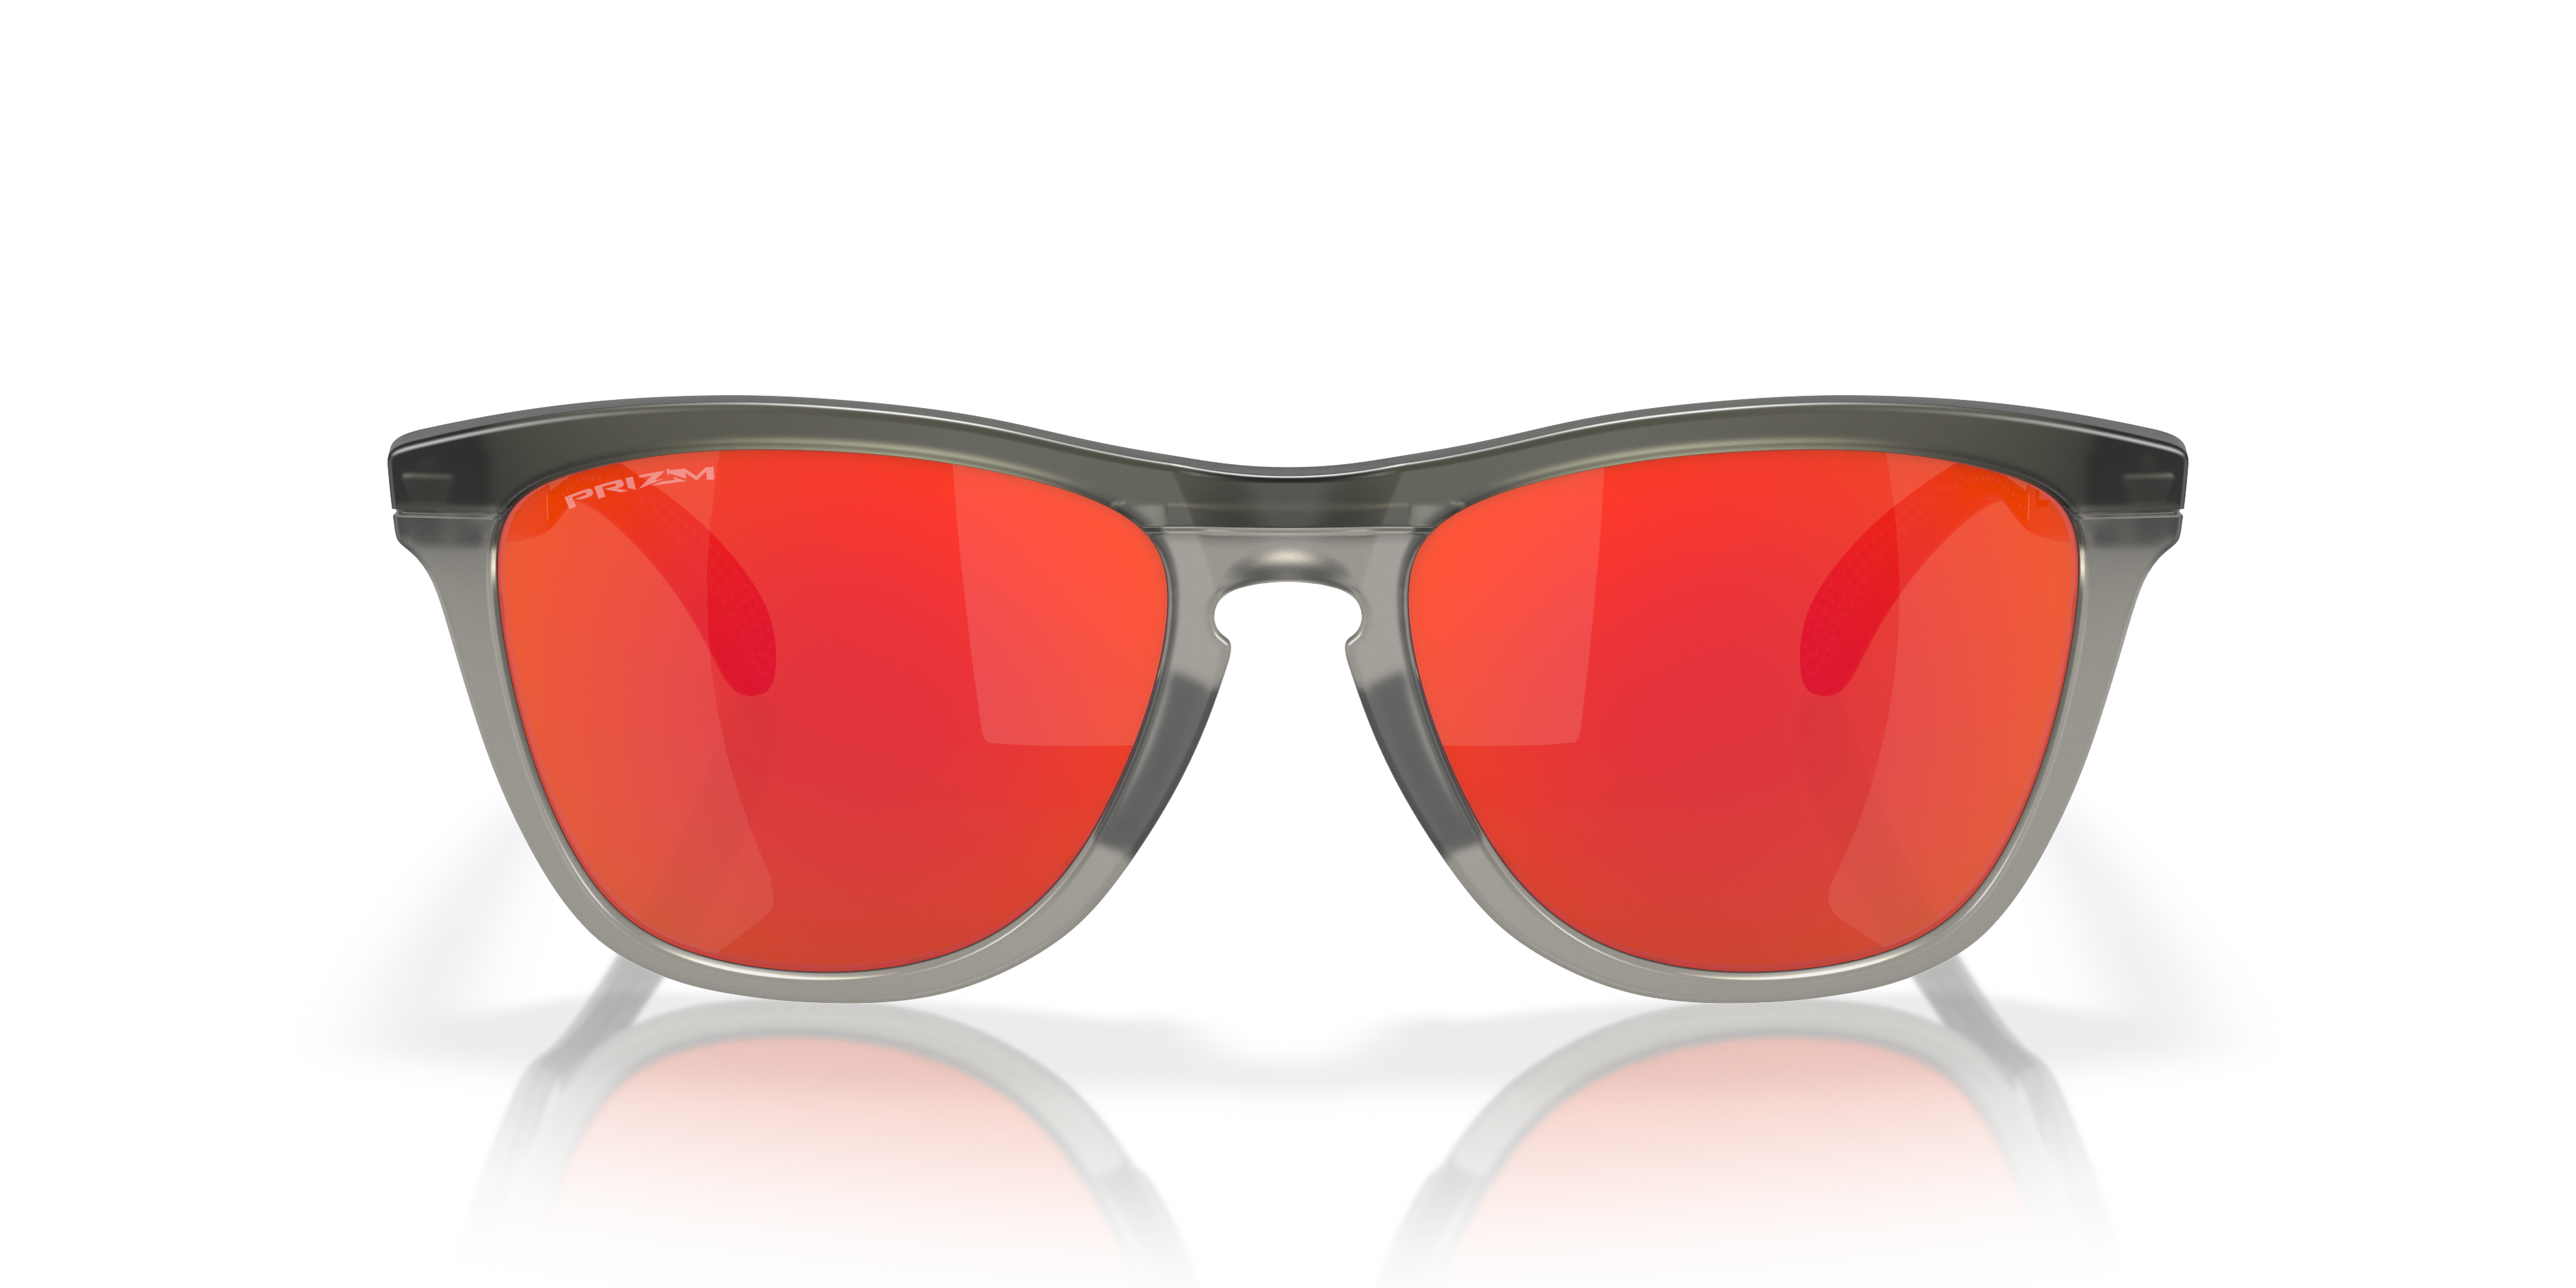 [products.image.front] Oakley Frogskins Range 0OO9284 928401